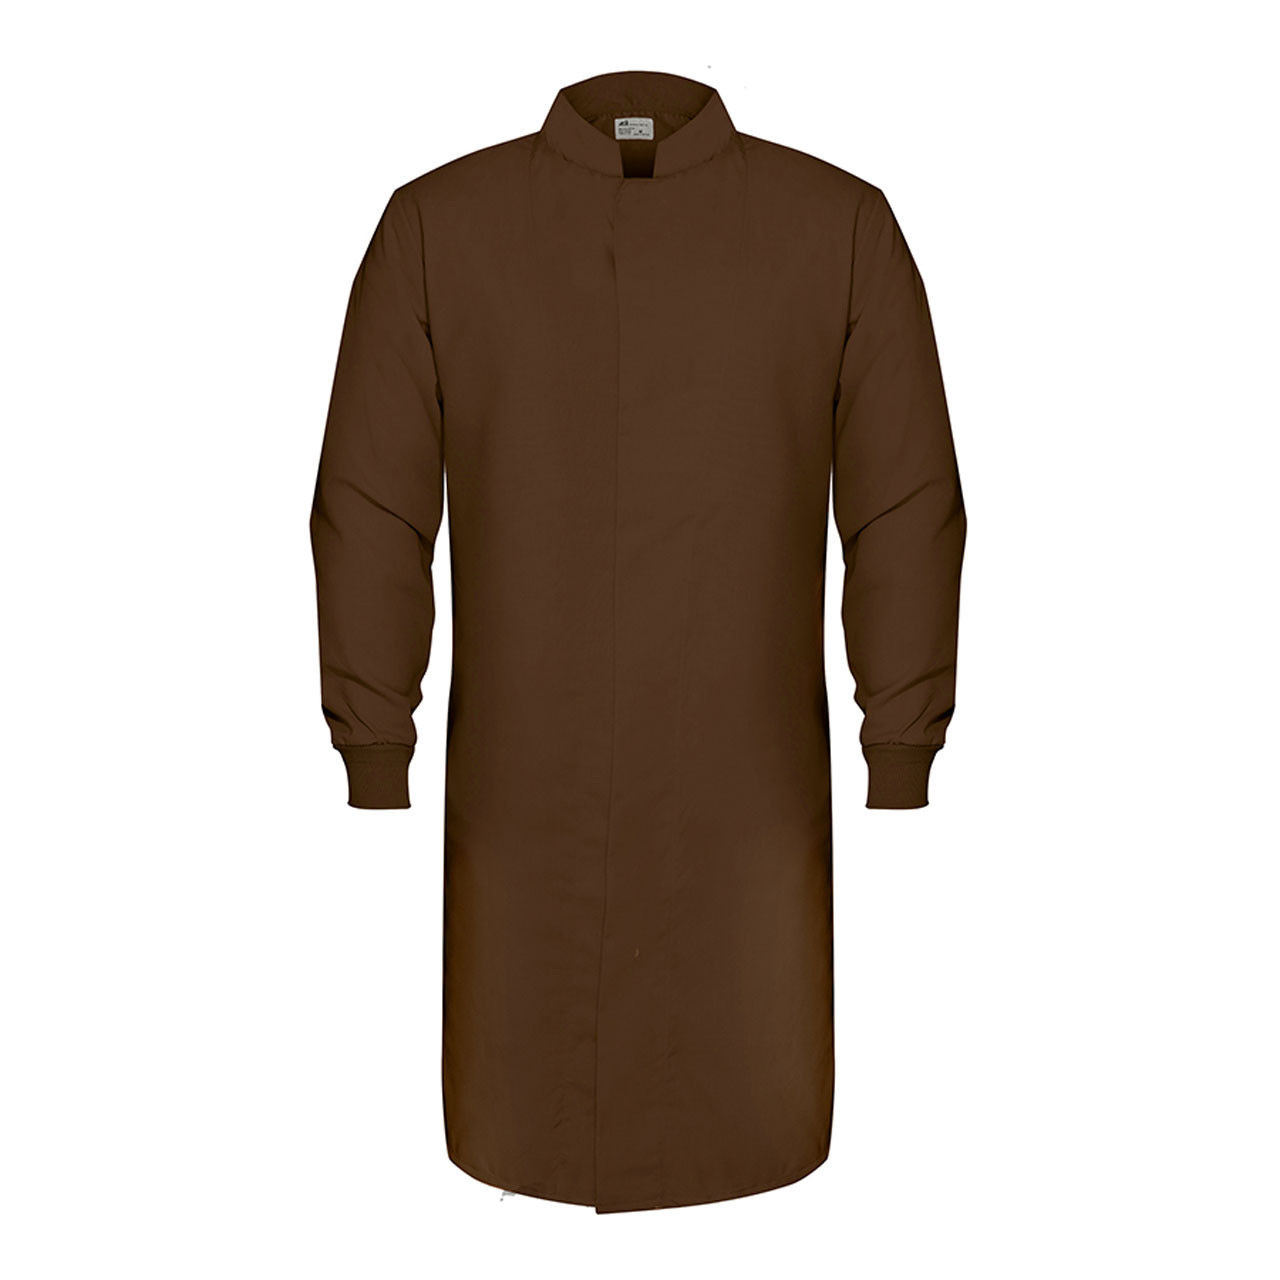 HACCP Knit Cuff Lab Coat, Brown Questions & Answers